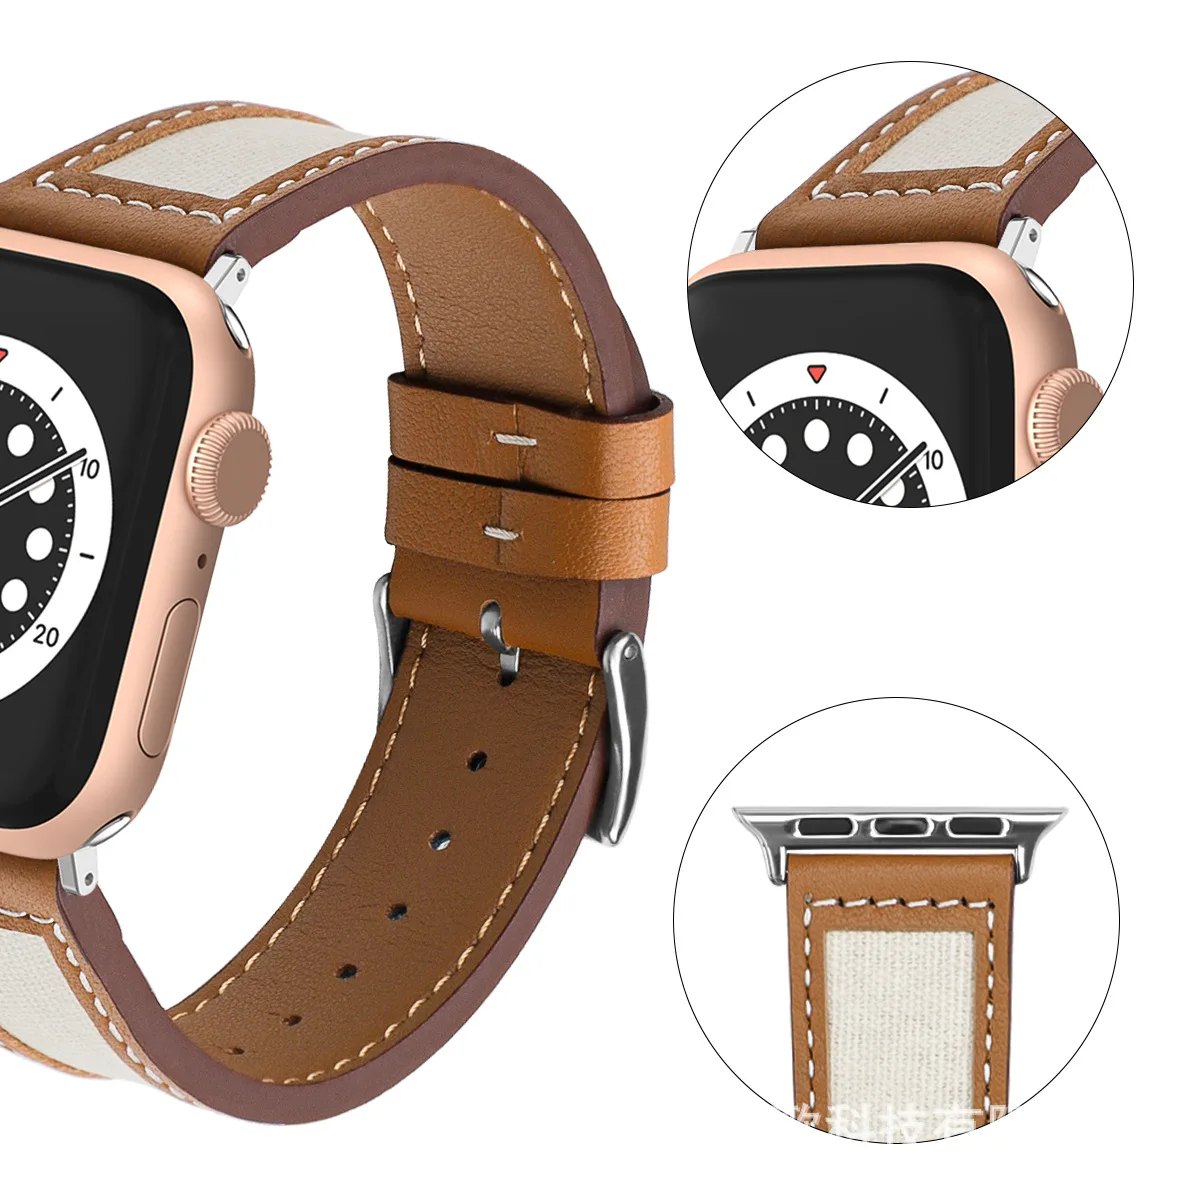 Apple Watch Leather Canvas Strap Contrast Strap enlarge